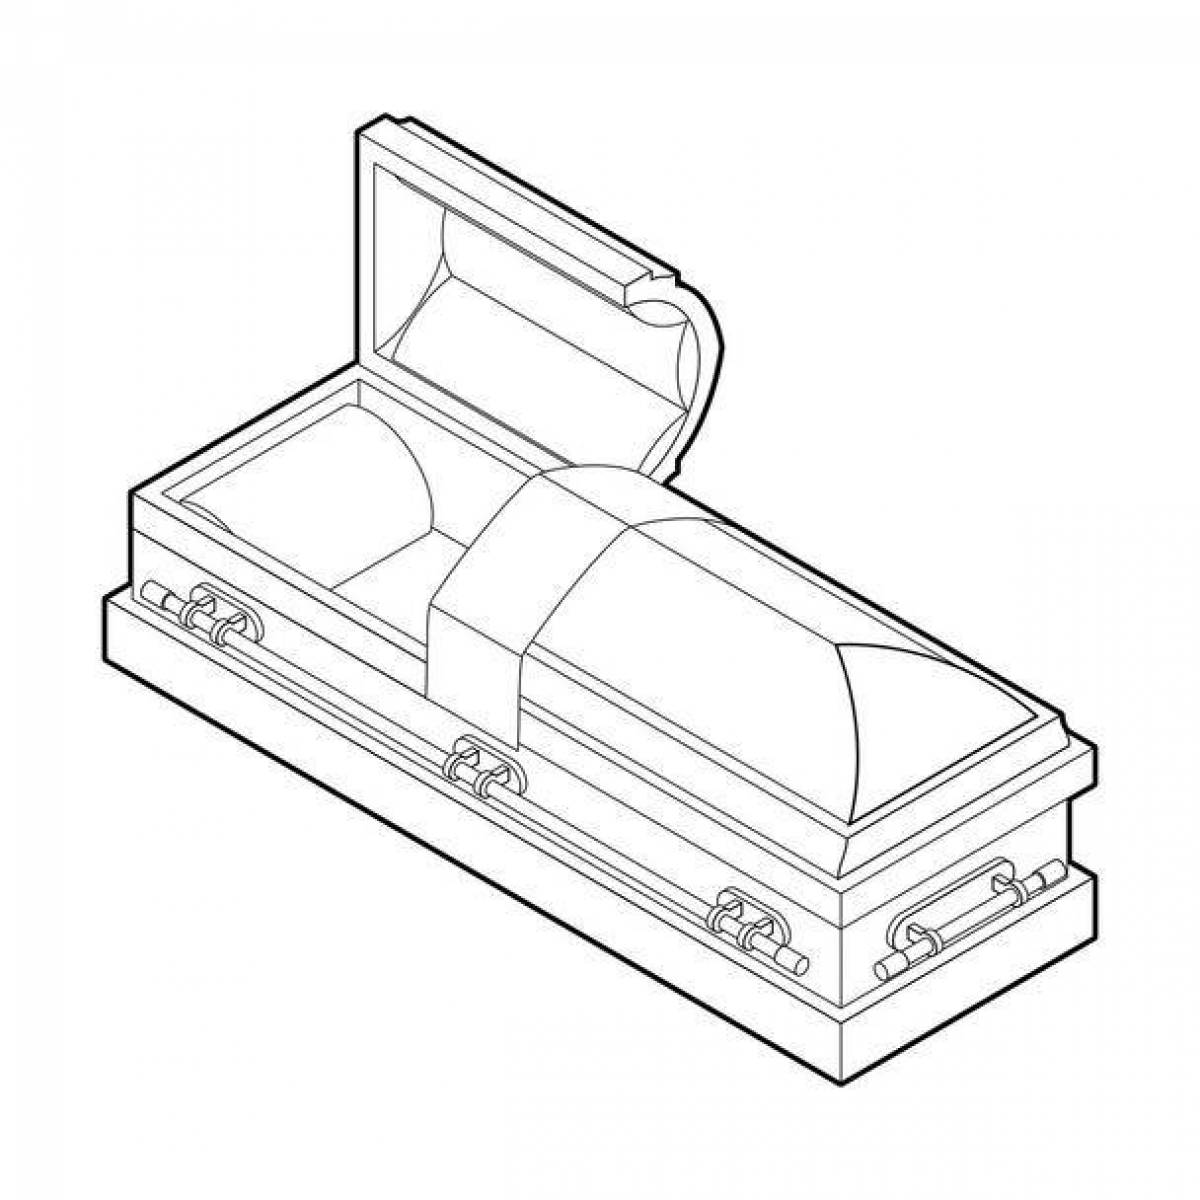 Coloring page mysterious coffin